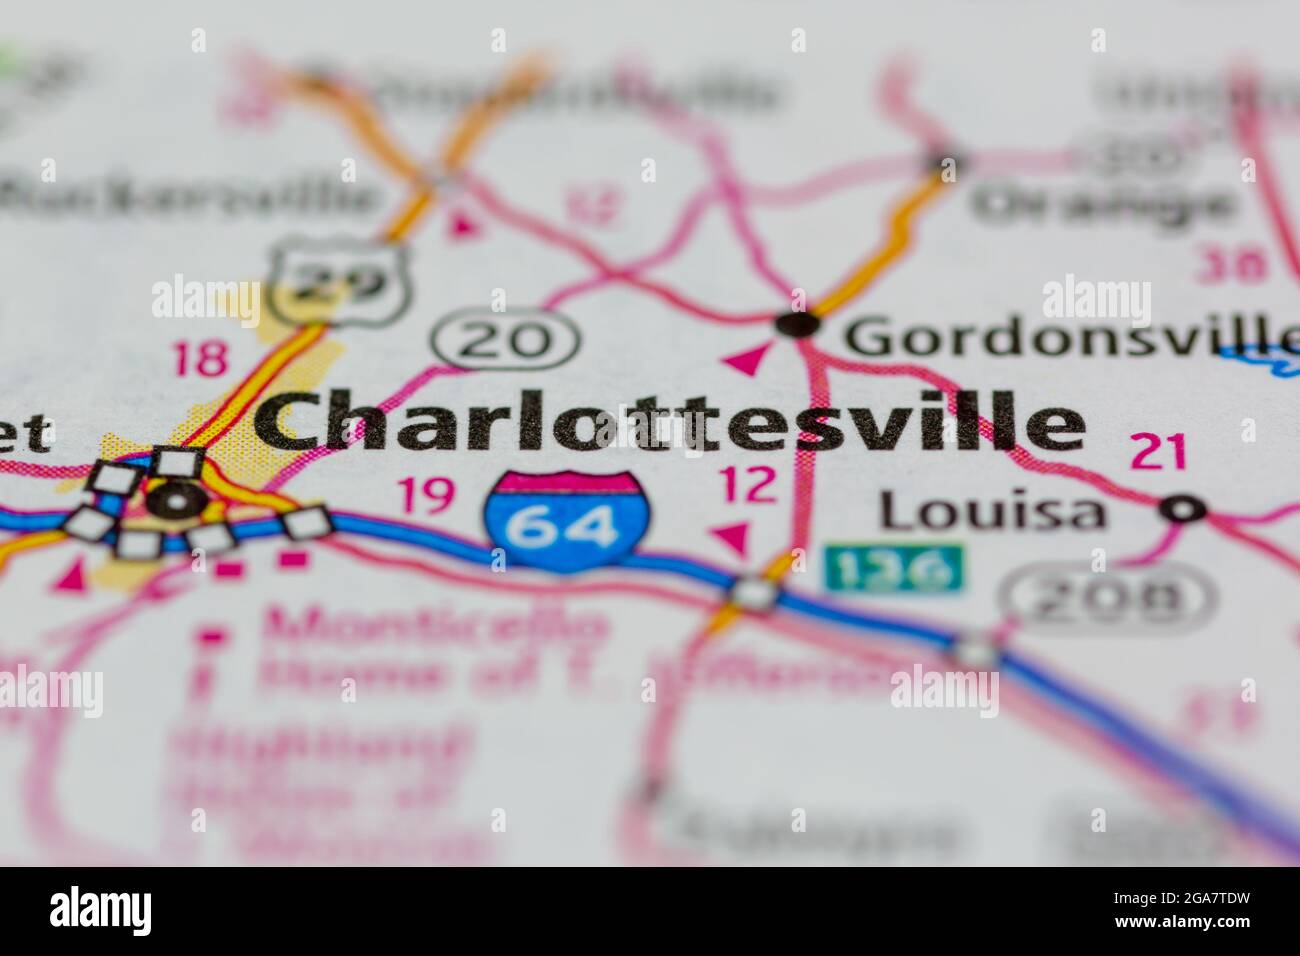 Charlottesville Virginia Shown On A Road Map Or Geography Map 2GA7TDW 